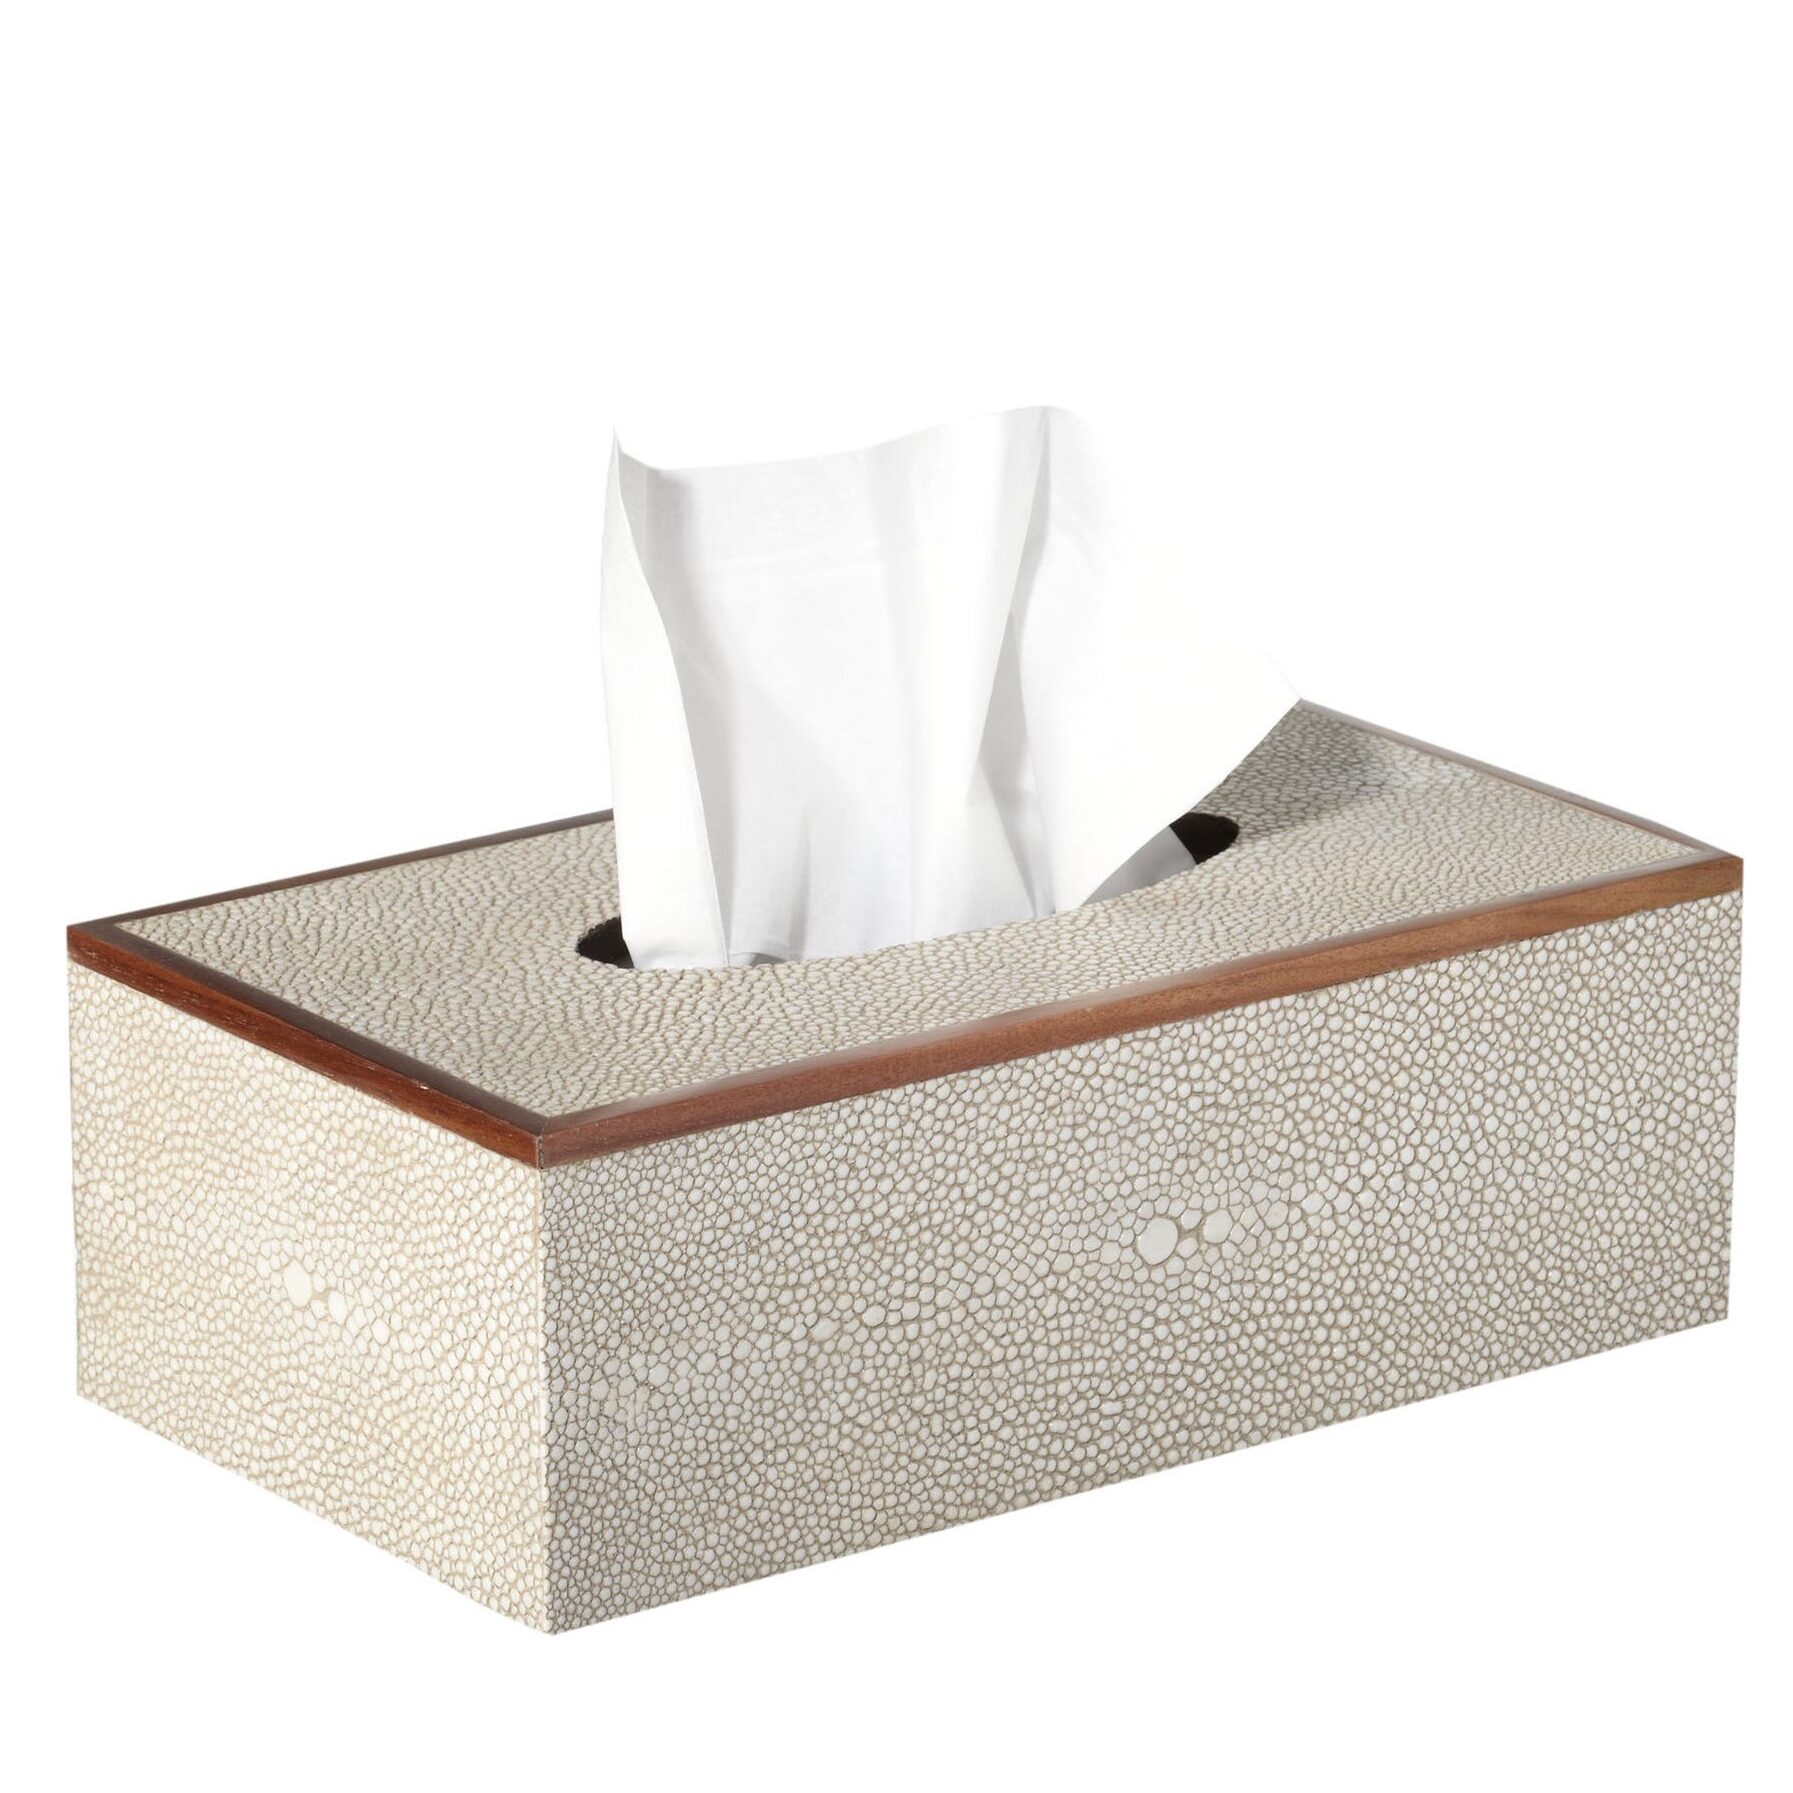 The 13 Best Tissue Box Covers of 2023